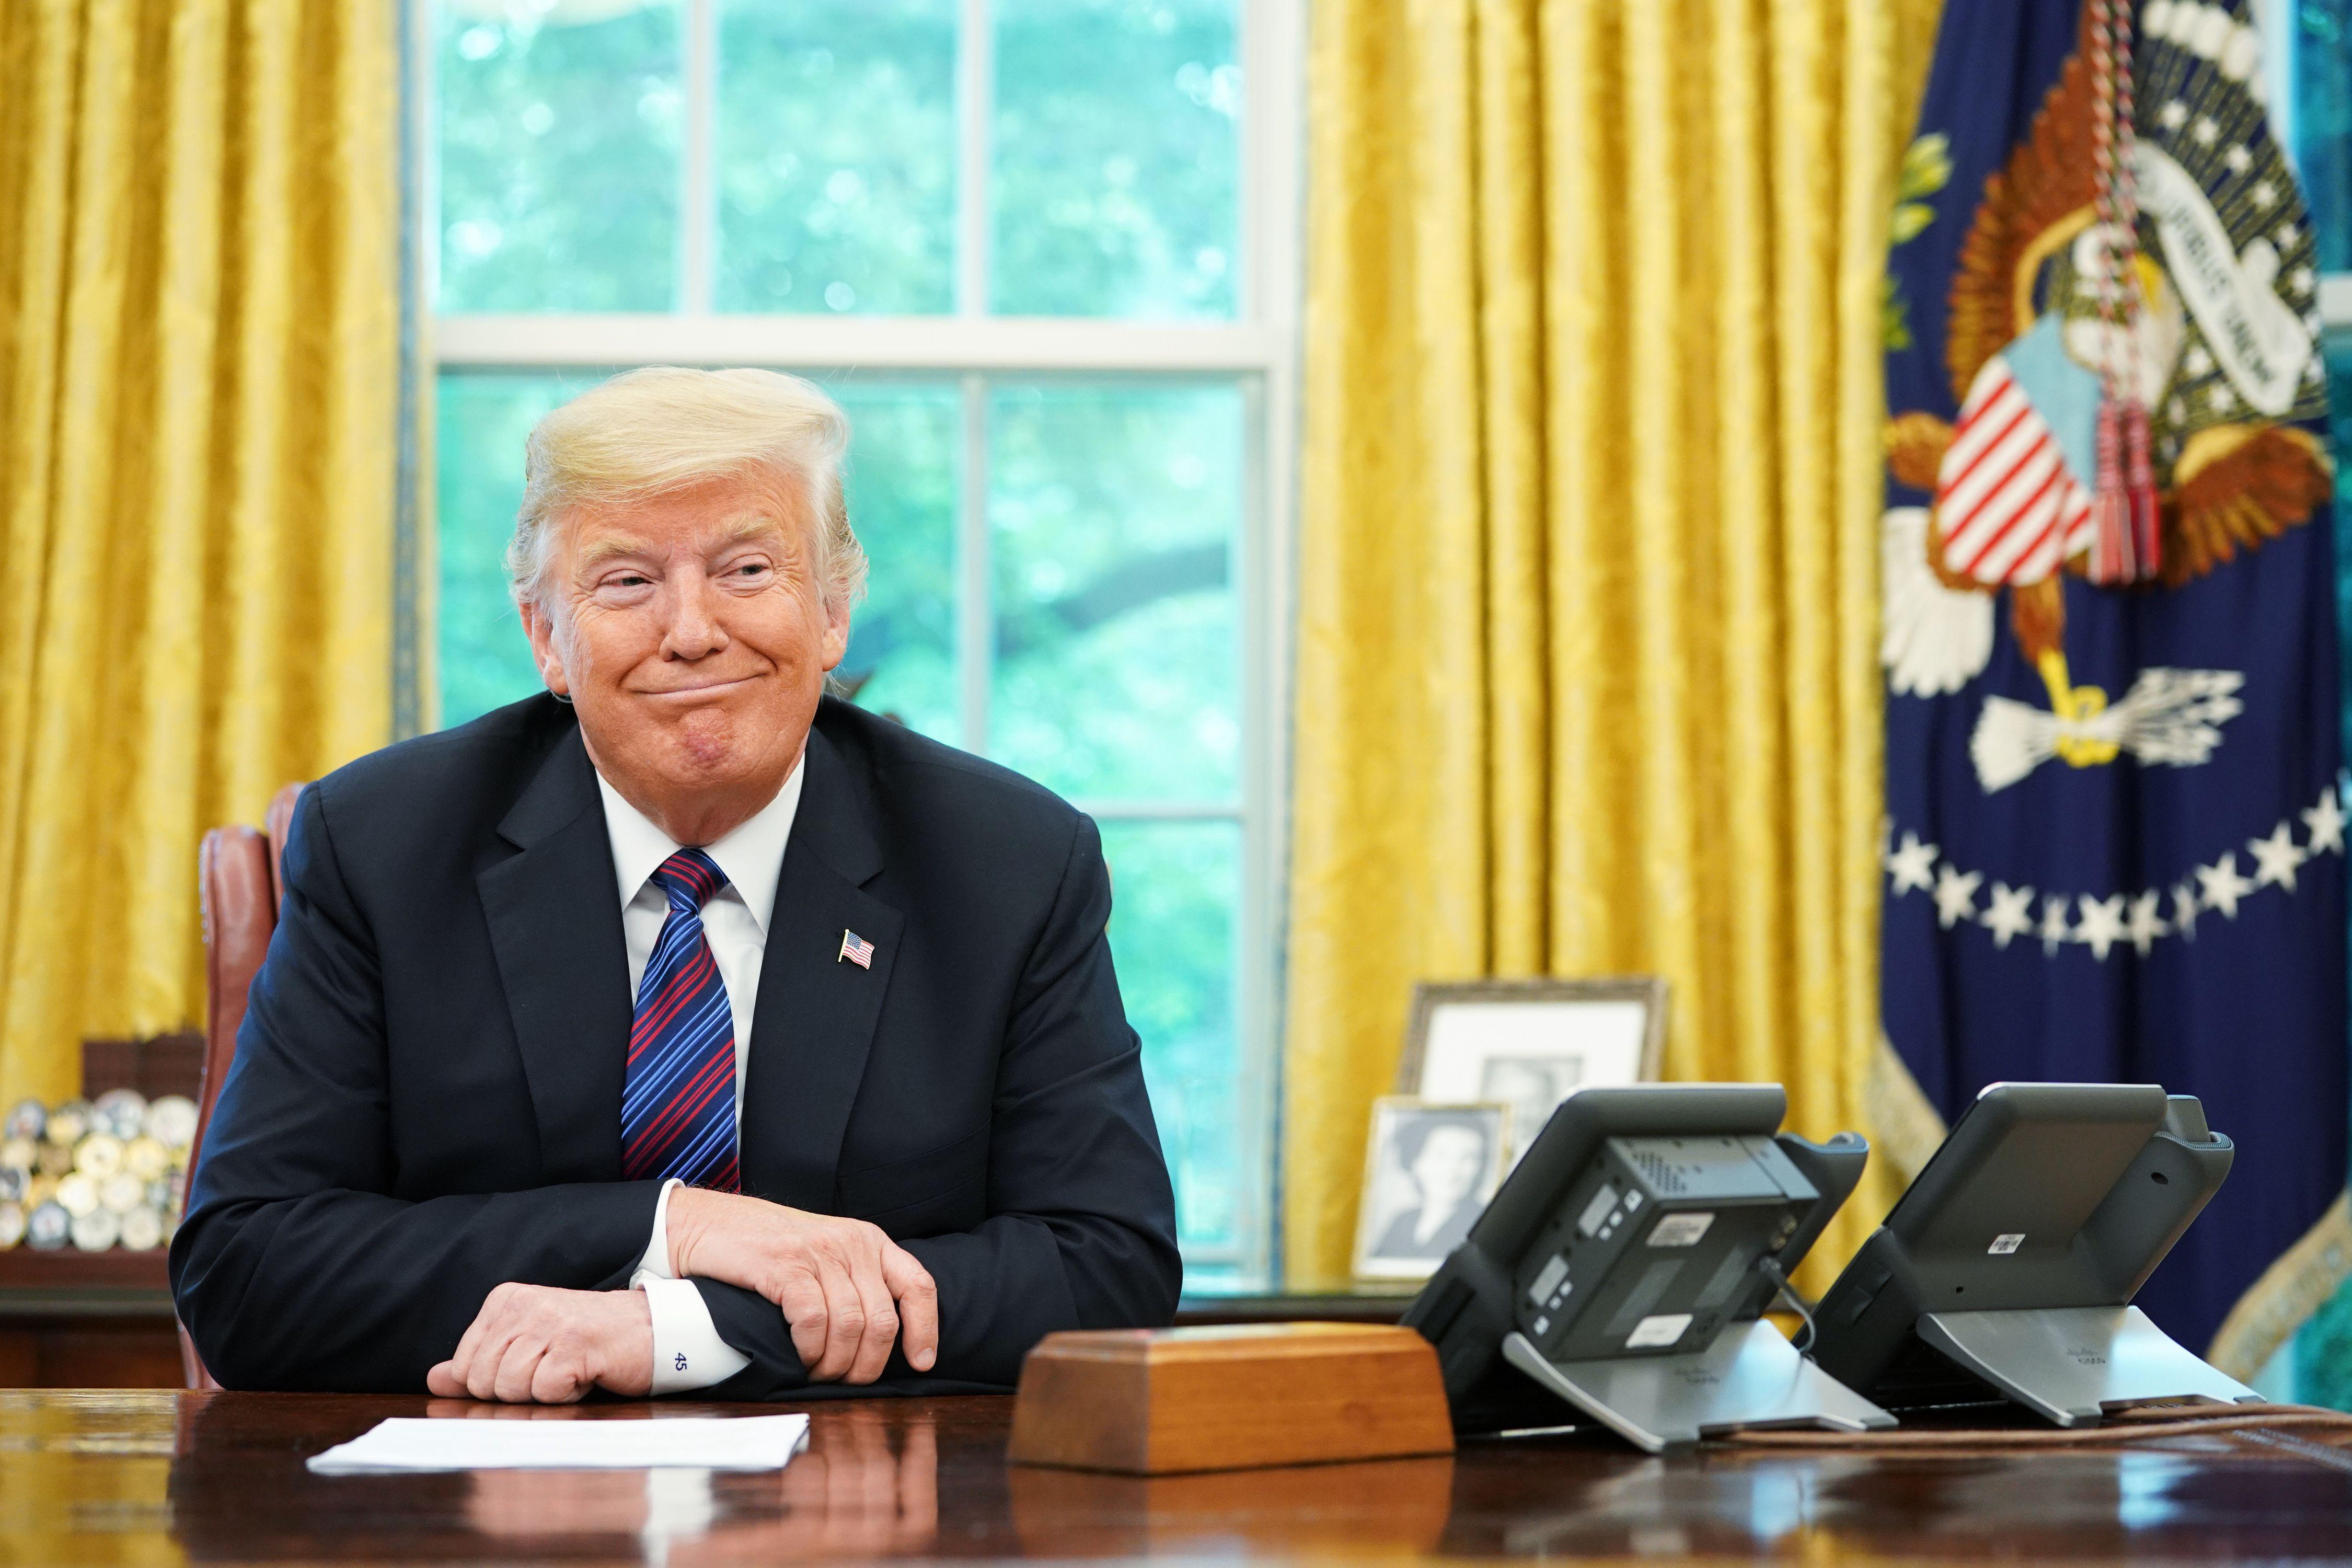 President Trump arms crossed and smirking at his desk in the Oval Office during a phone conversation.